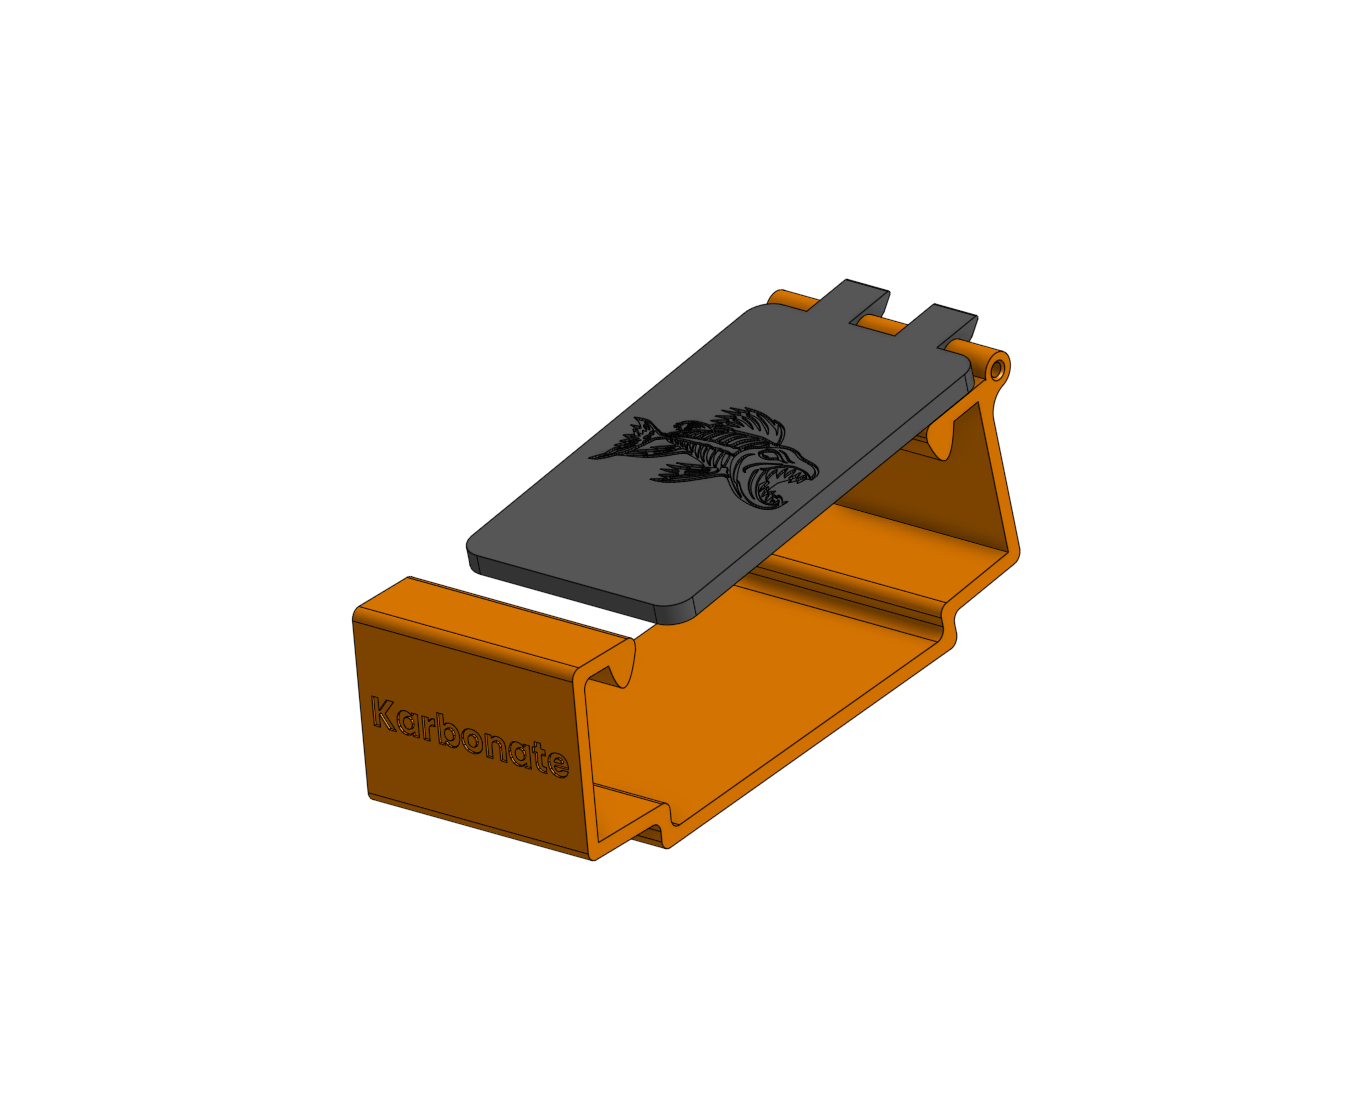 Model rendering of the ID holder